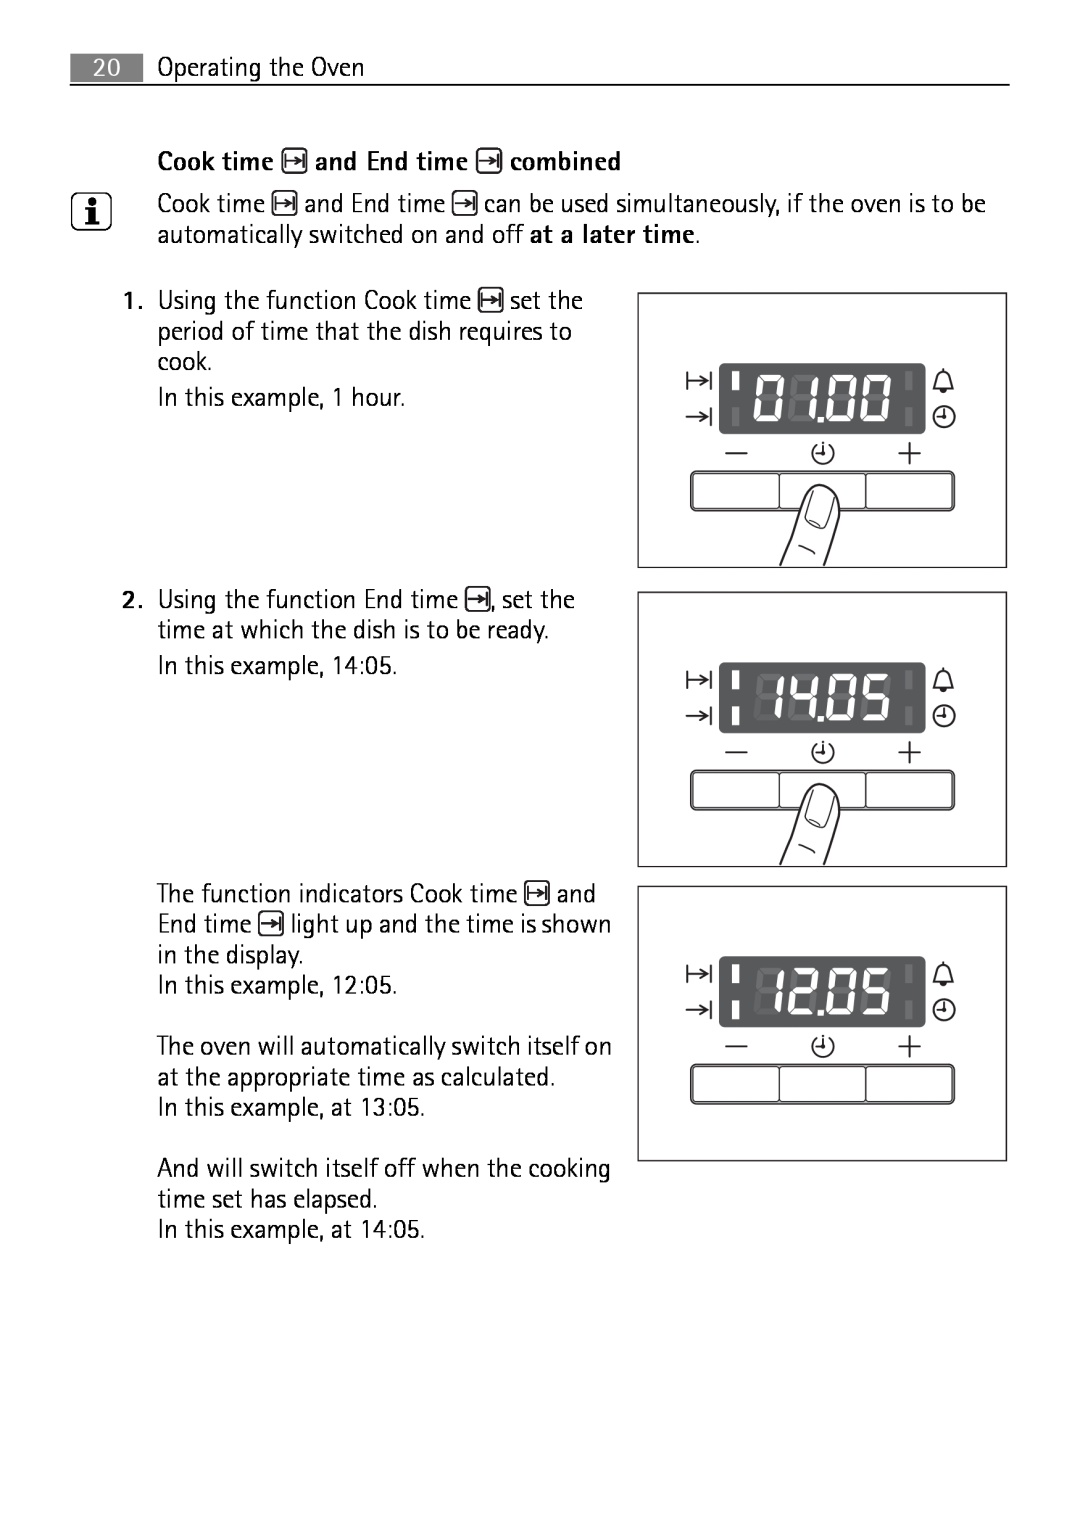 Electrolux B2100-5 user manual Cook time and End time combined 